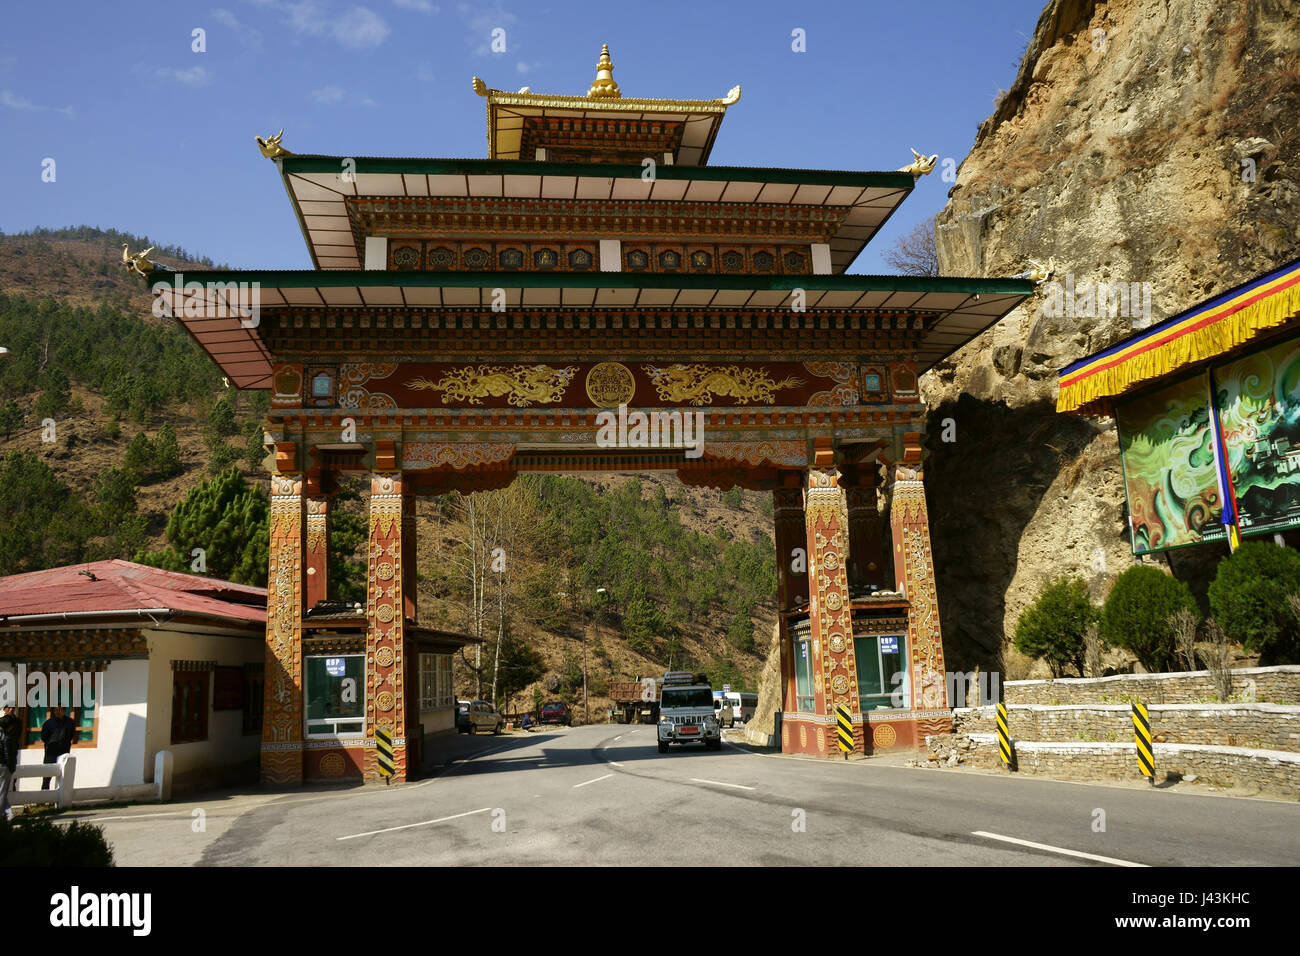 Gate over road to Thimphu at intersection with Paro road, Bhutan Stock Photo